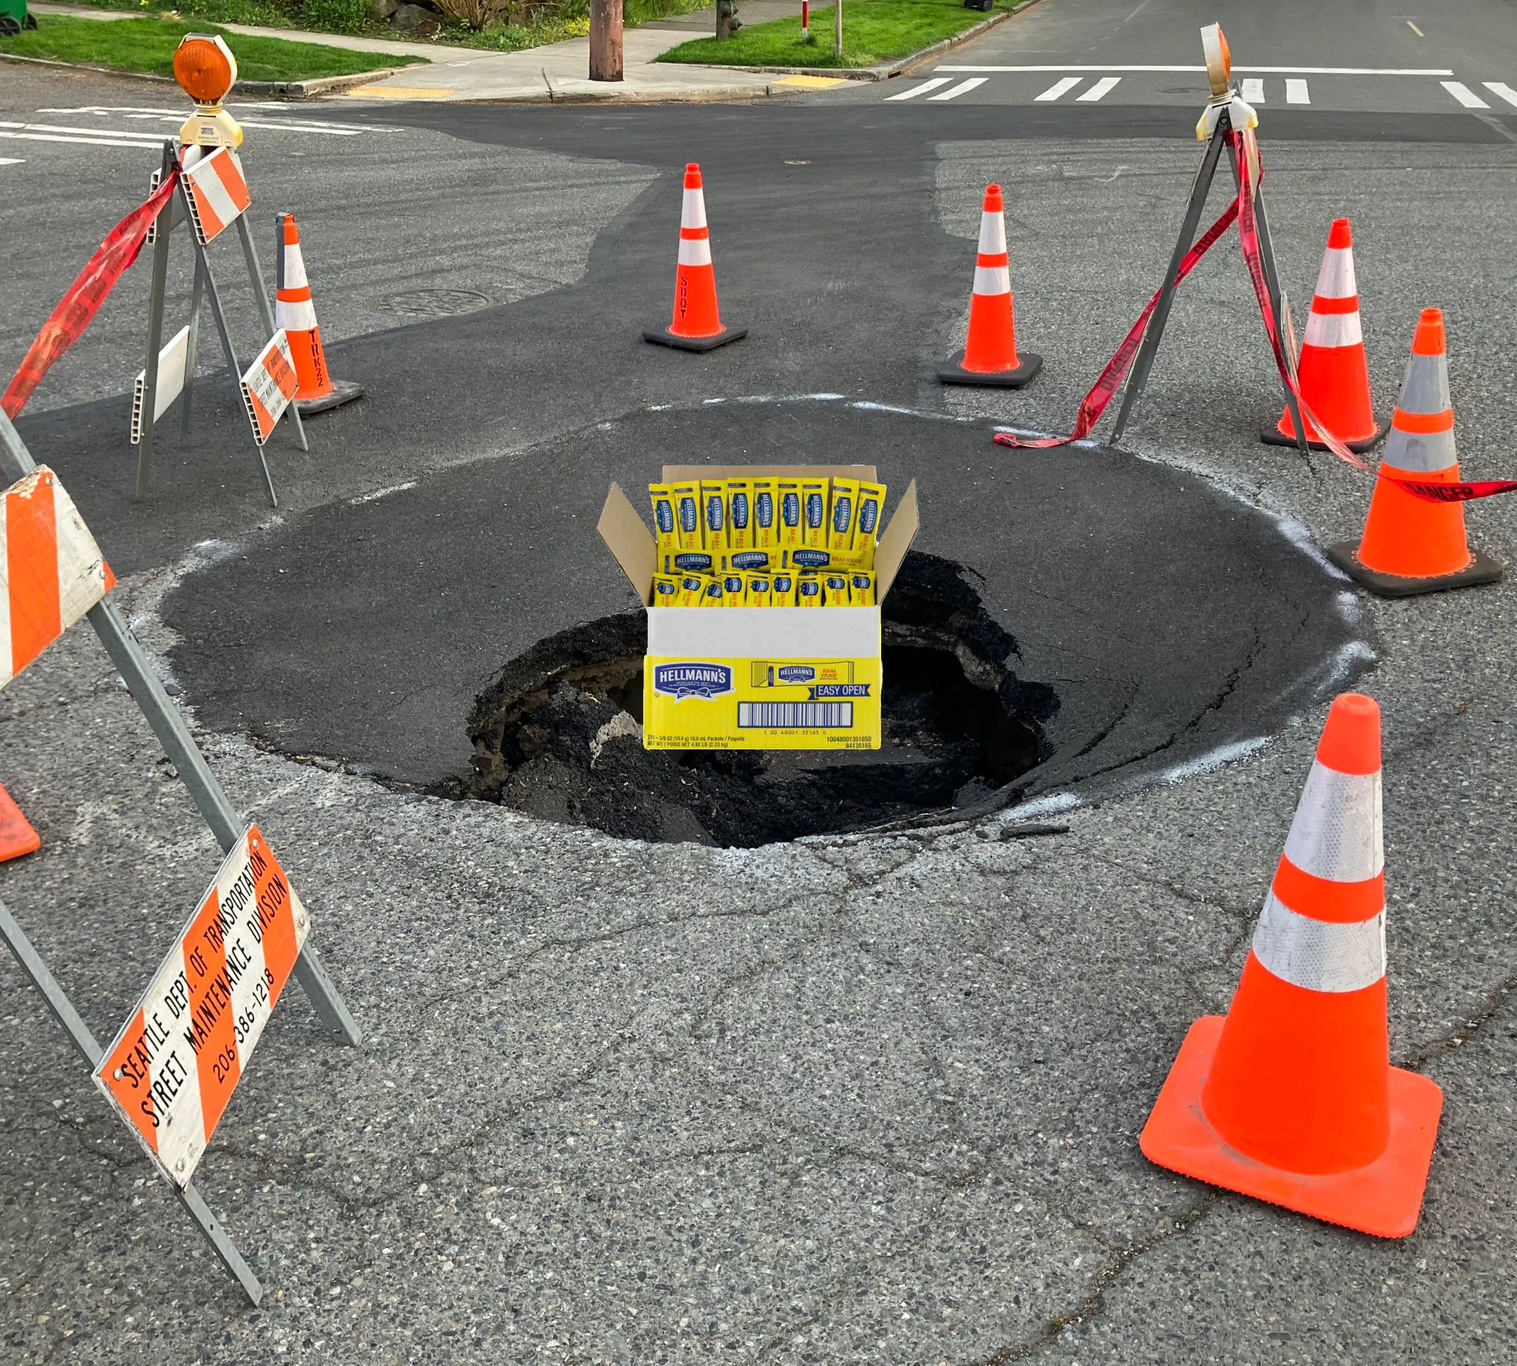 Sinkhole with box filled with mayonnaise packets.